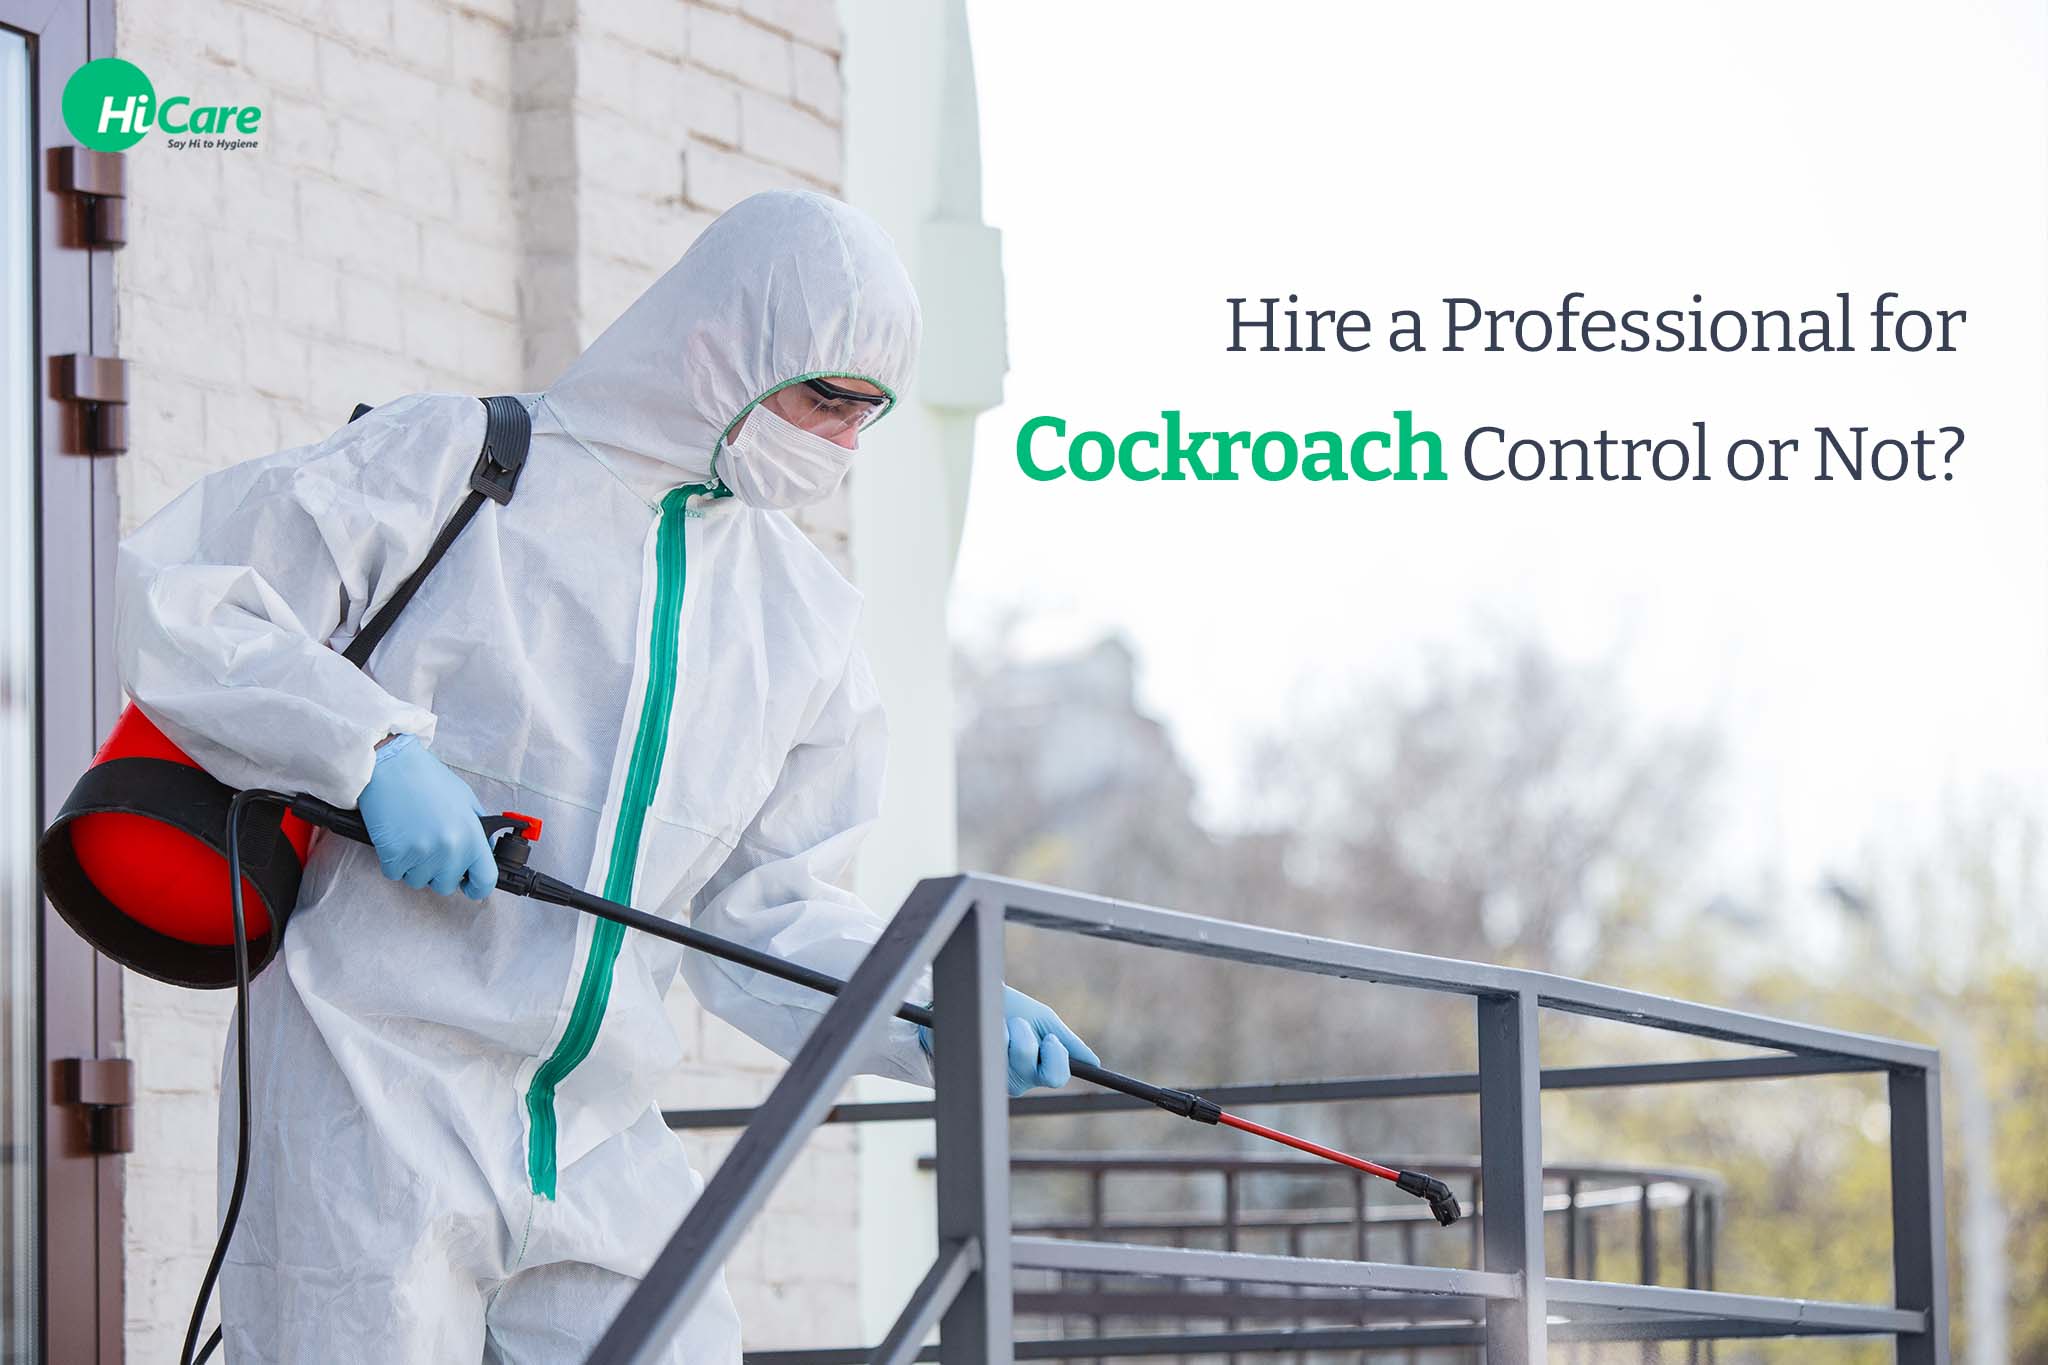 reasons to hire a professional cockroach control